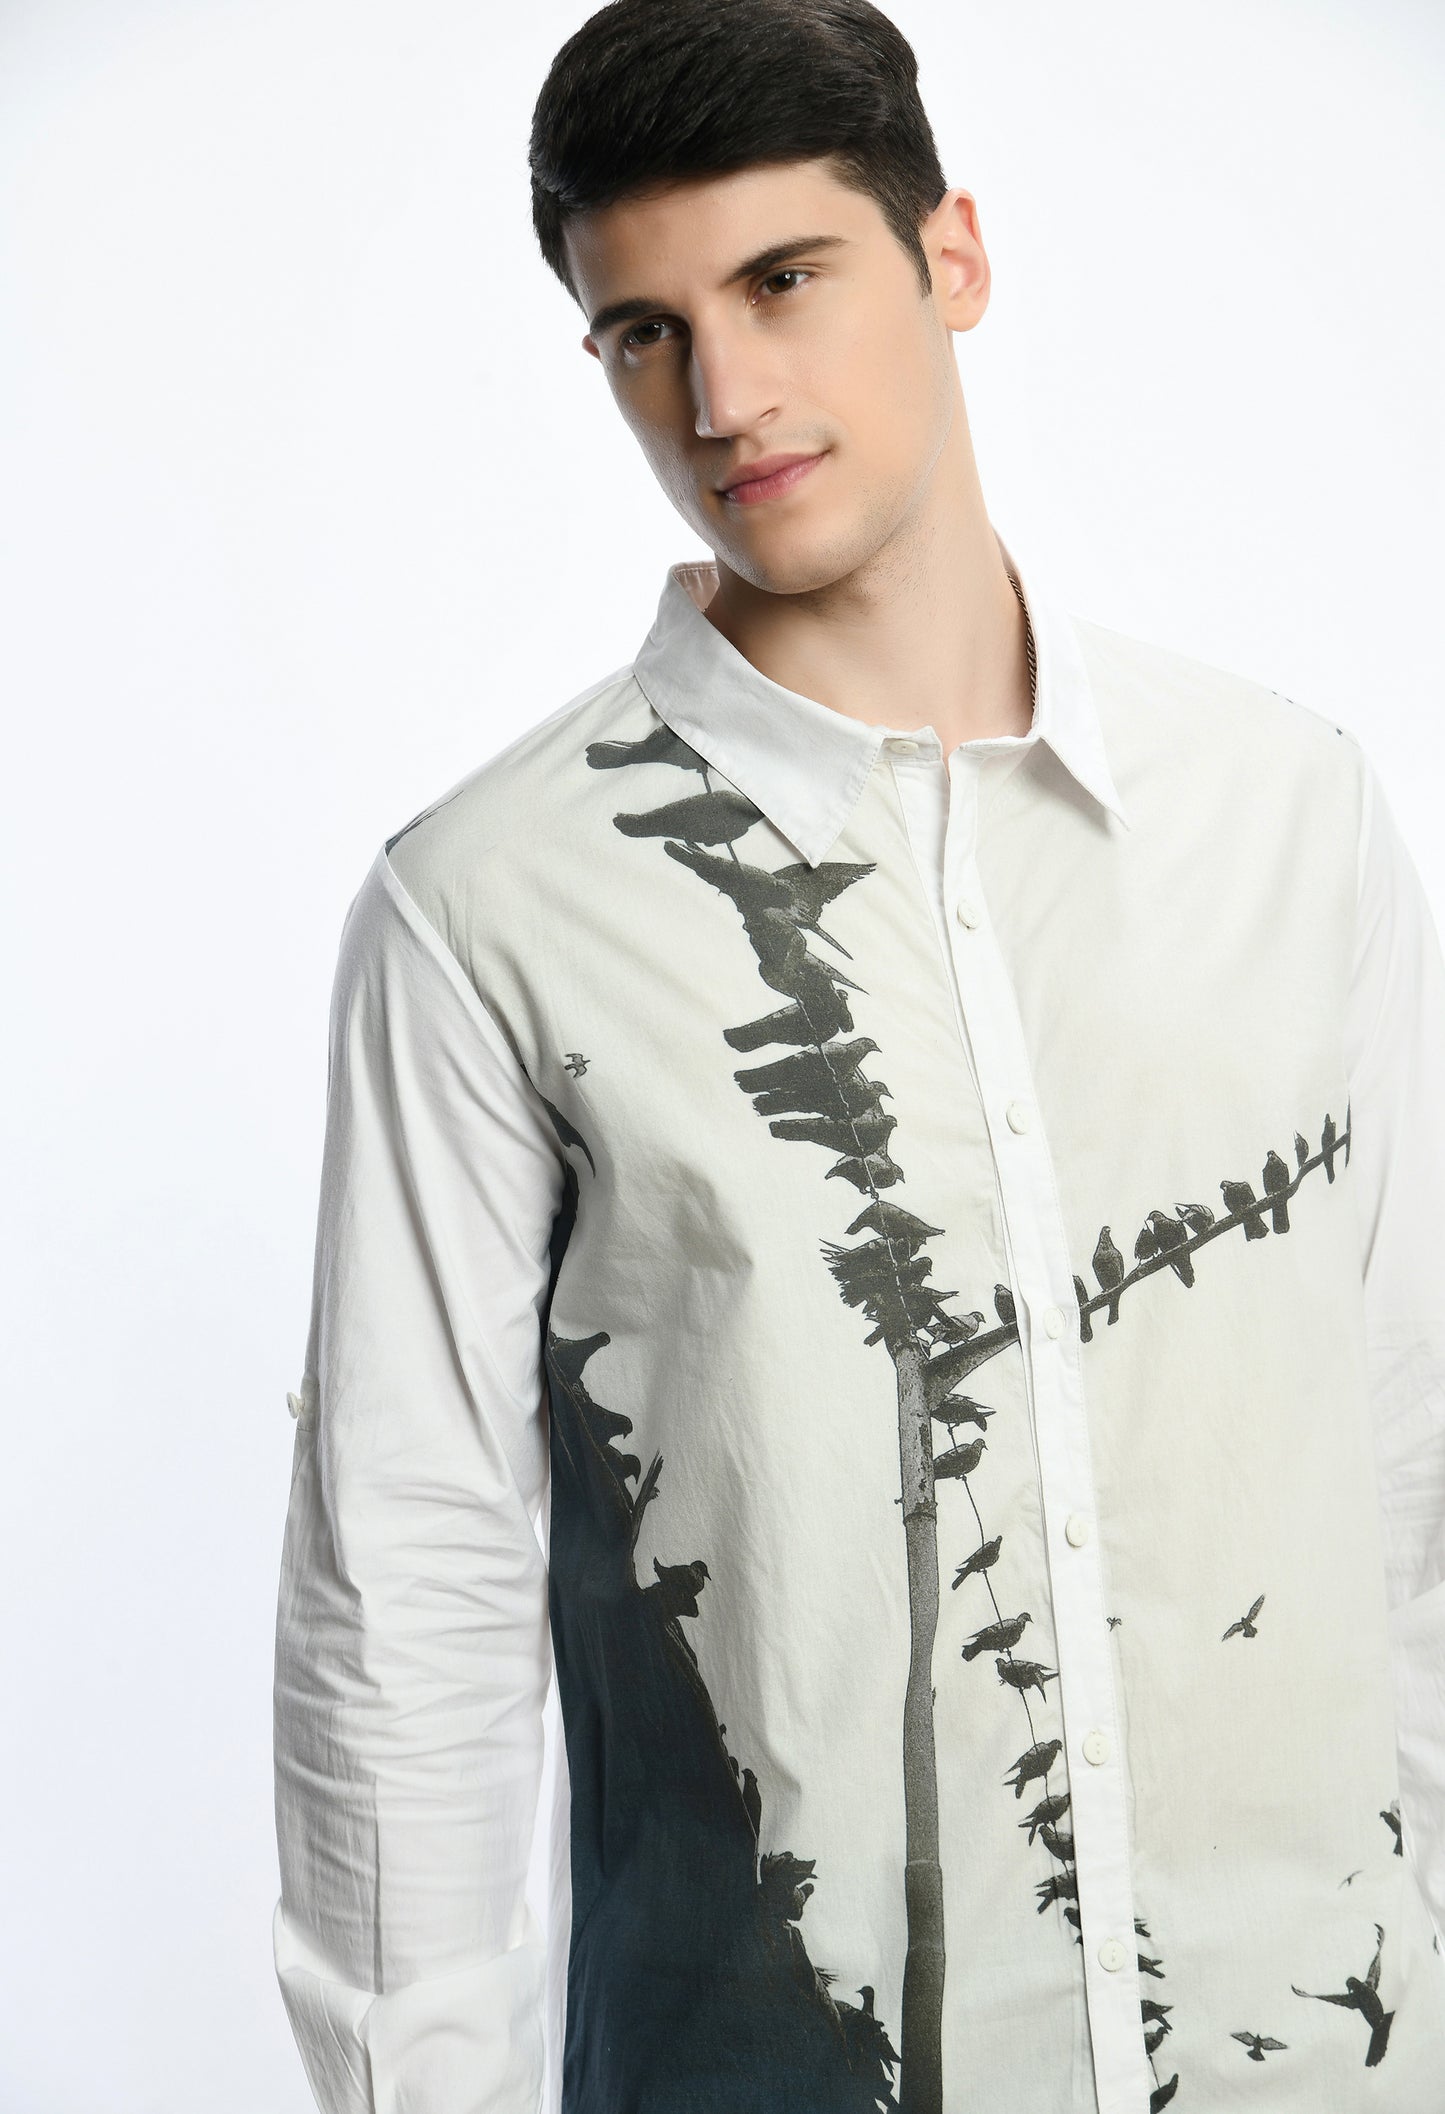 White high low, stylish cotton shirt with digital print on it